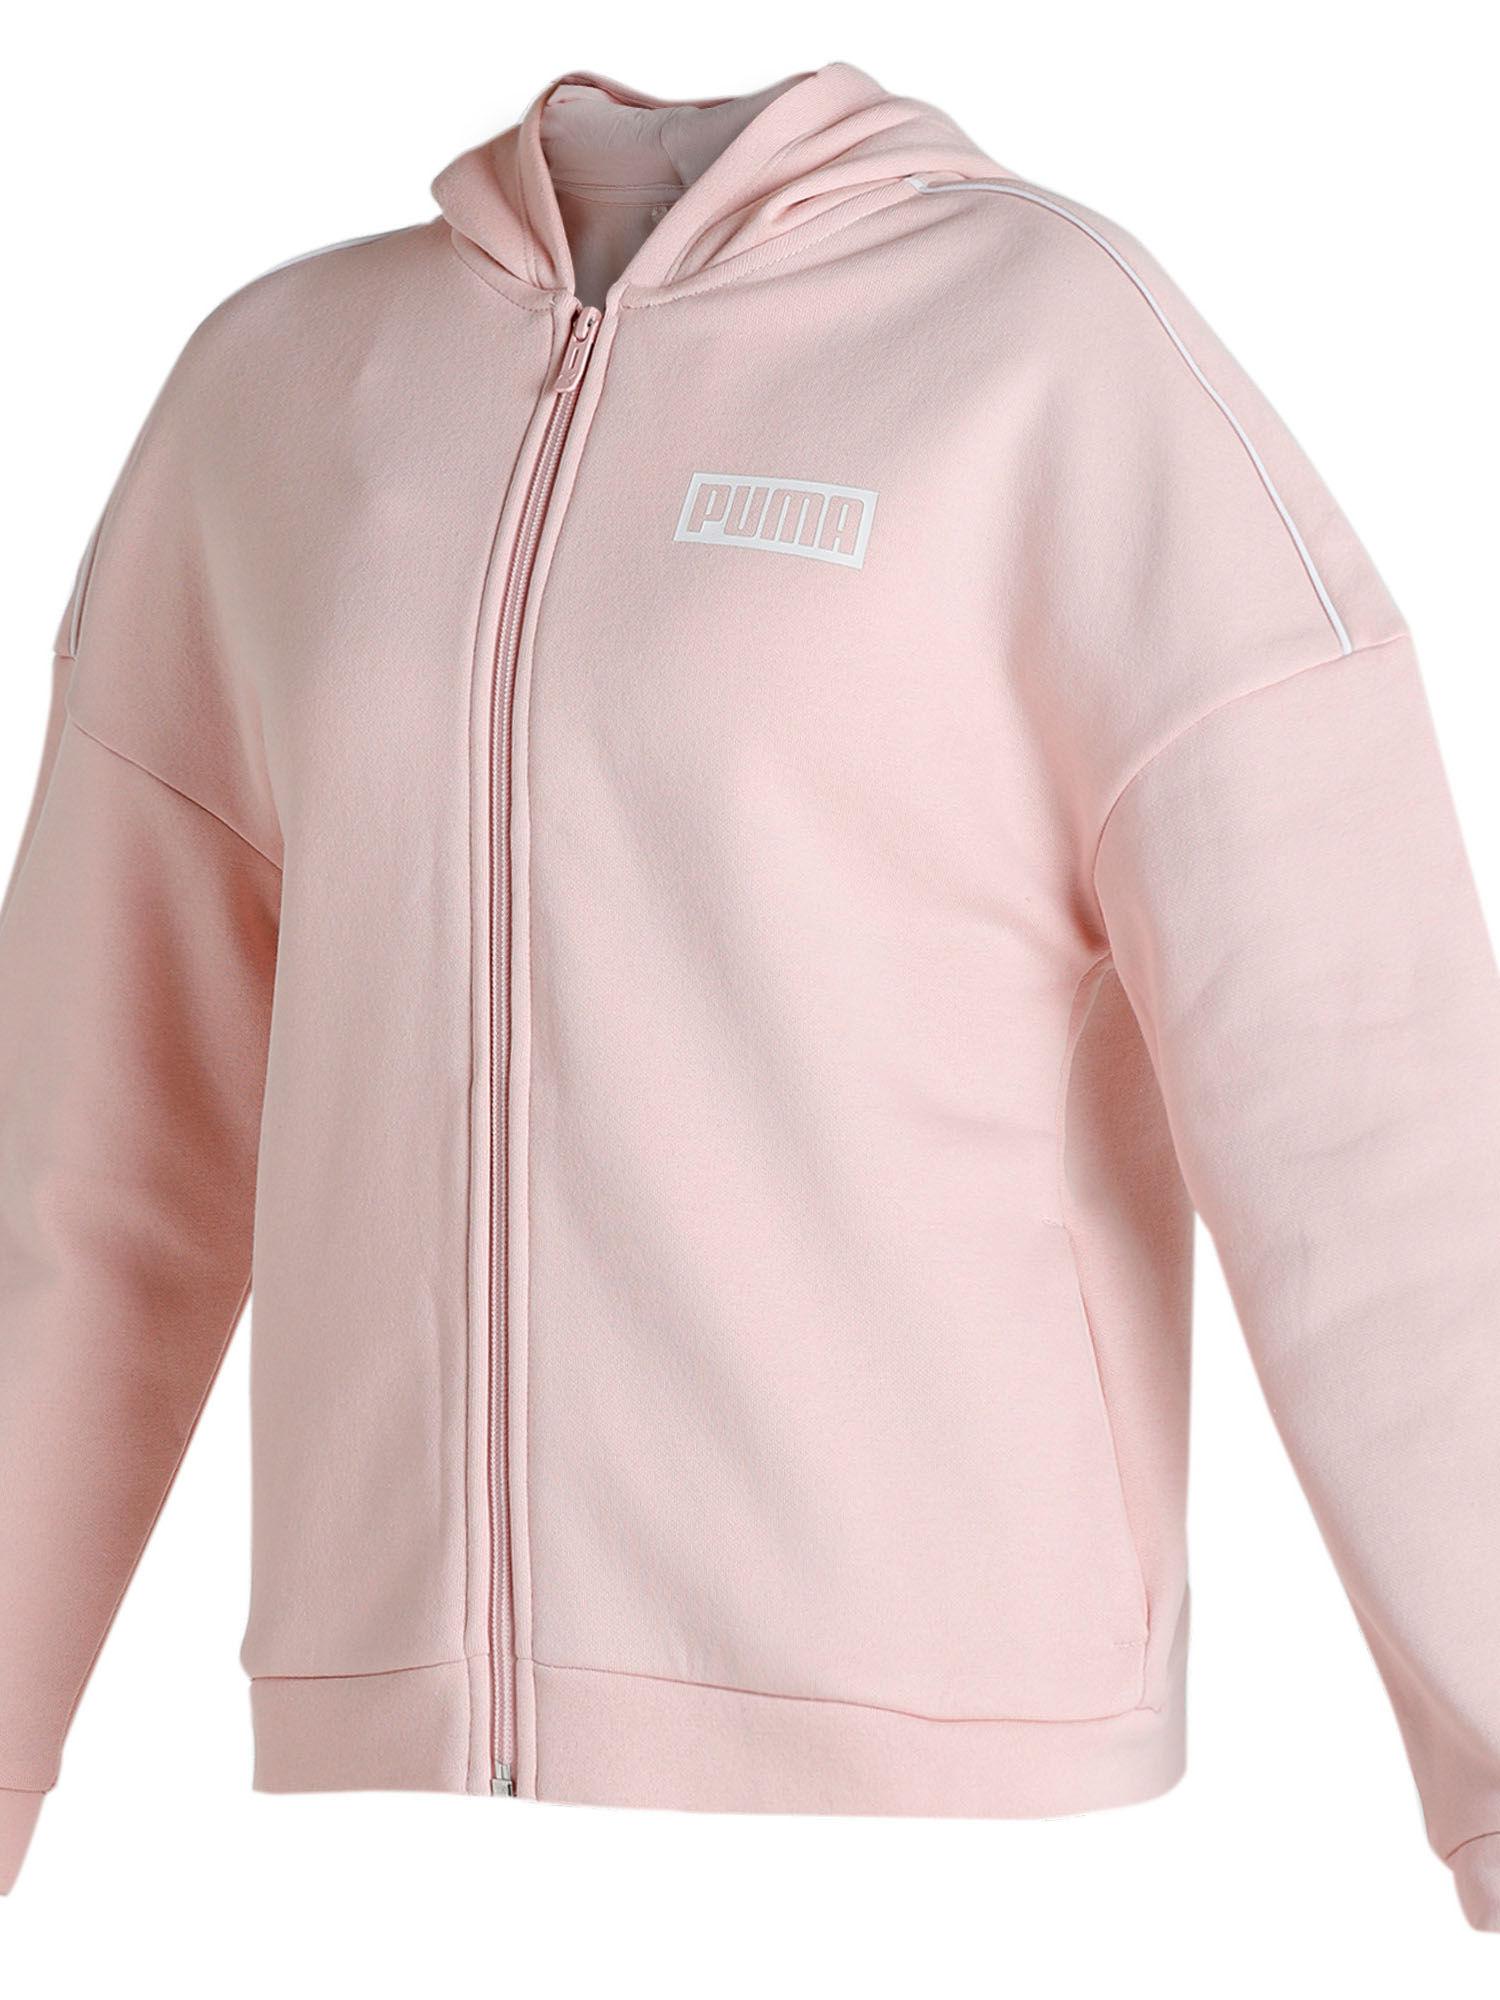 hooded girl's pink casual track suit